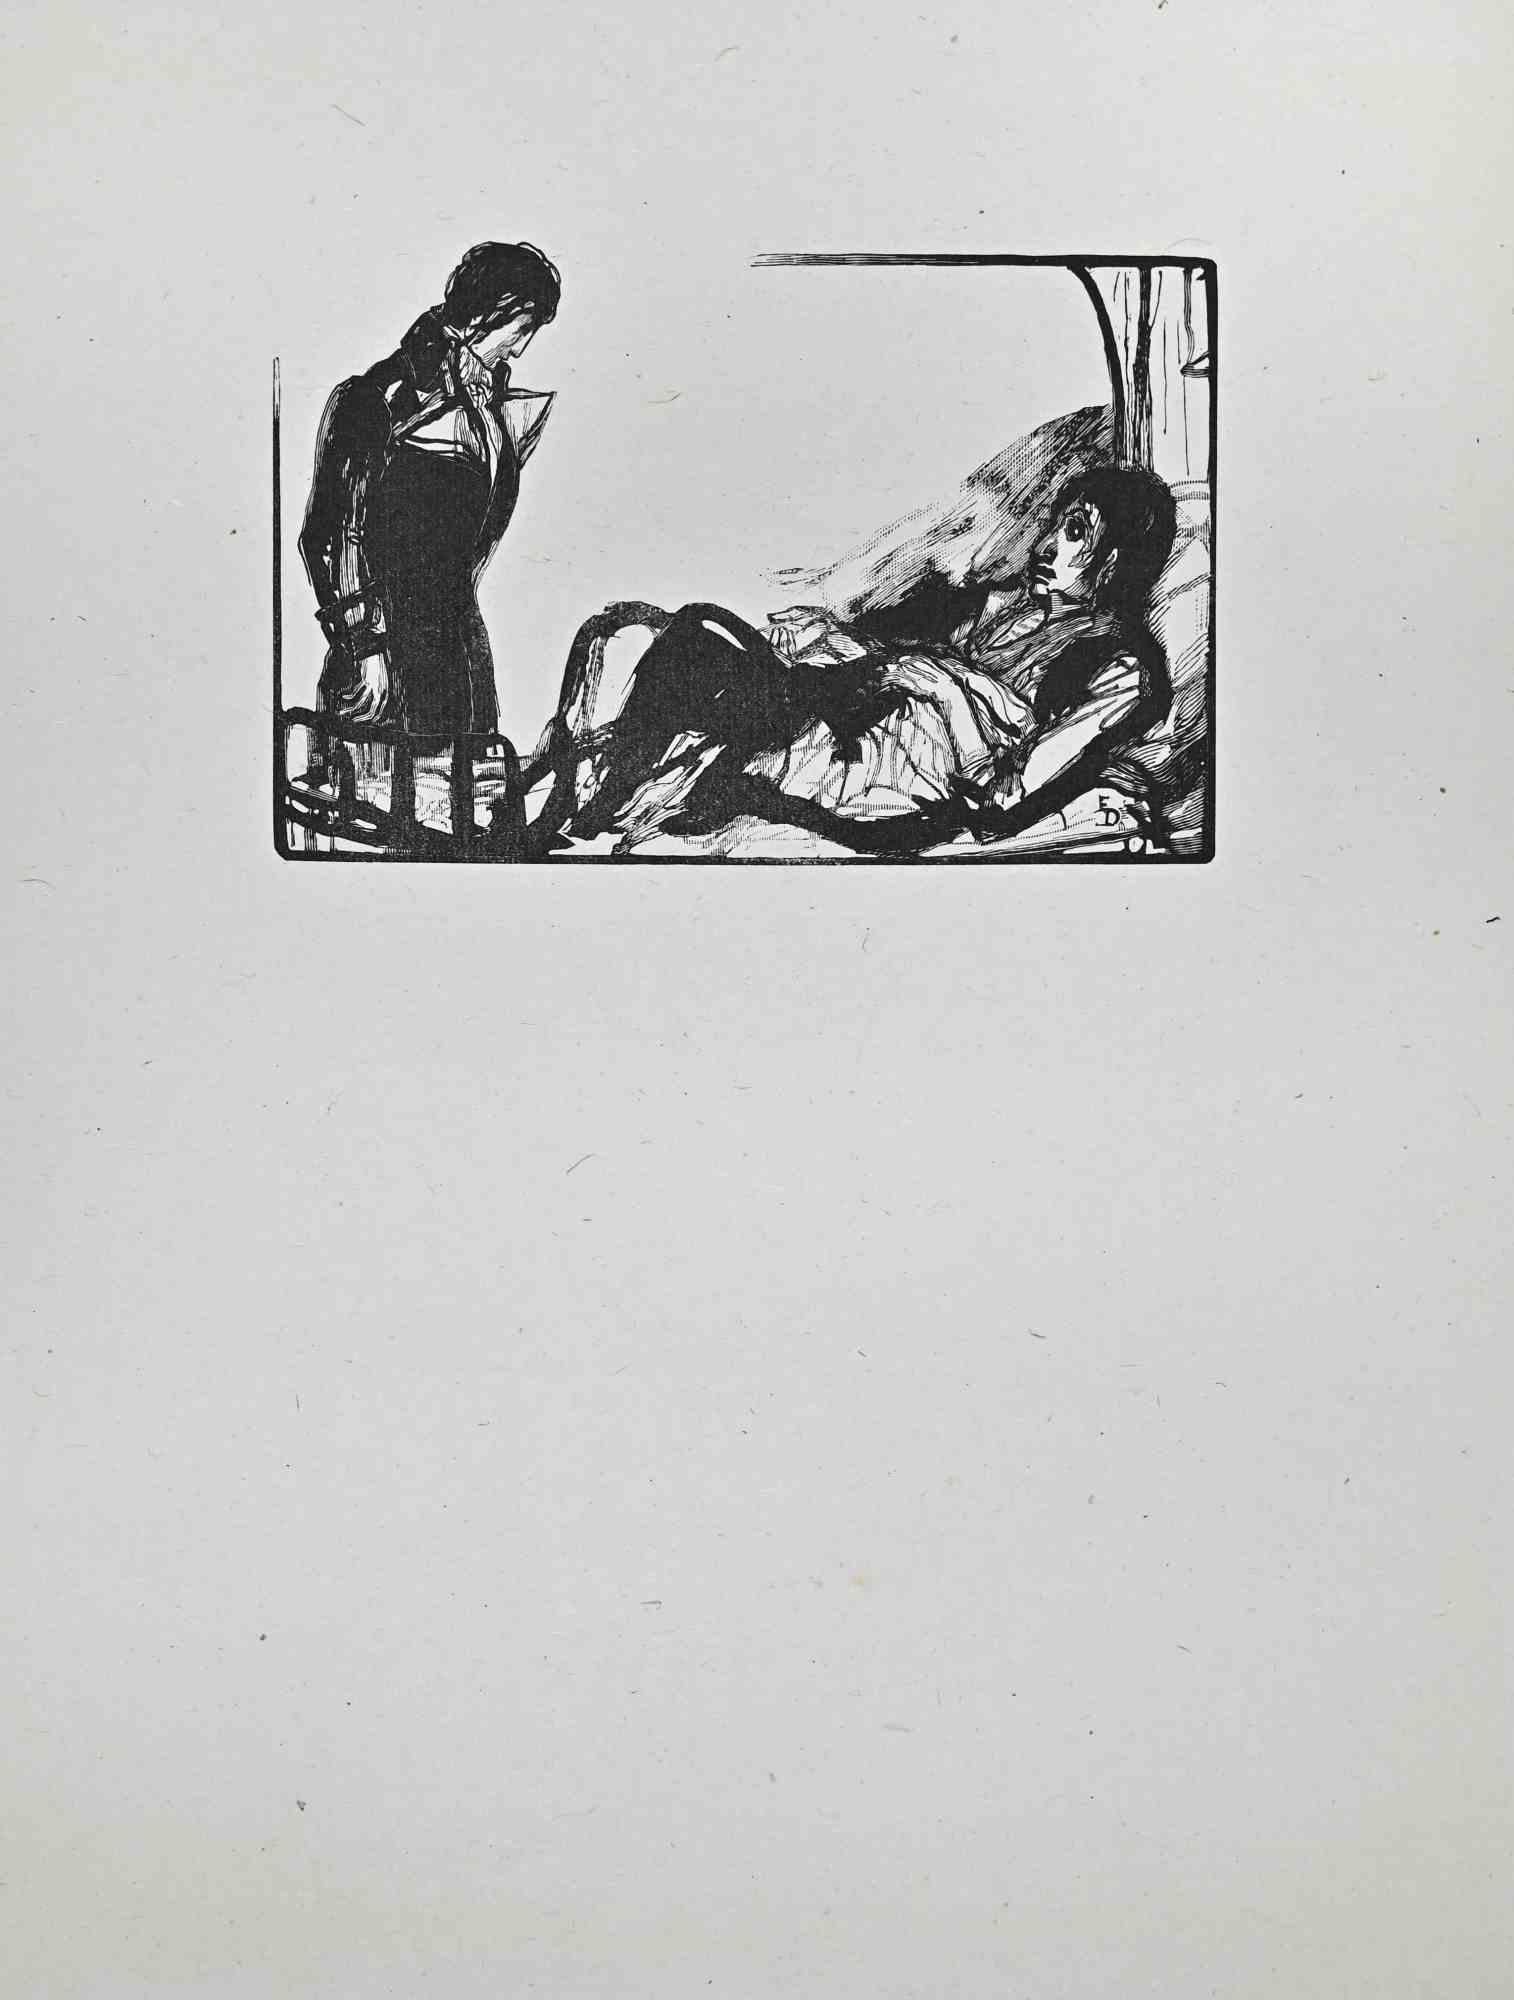 The Visit in The Hospital is a woodcut print on ivory-colored paper realized by Paul Baudier (1881-1962) in the 1930s.

Good conditions.

Paul Baudier, (born October 18, 1881 in Paris and died December 9, 1962 in Châtillon), was a French painter,